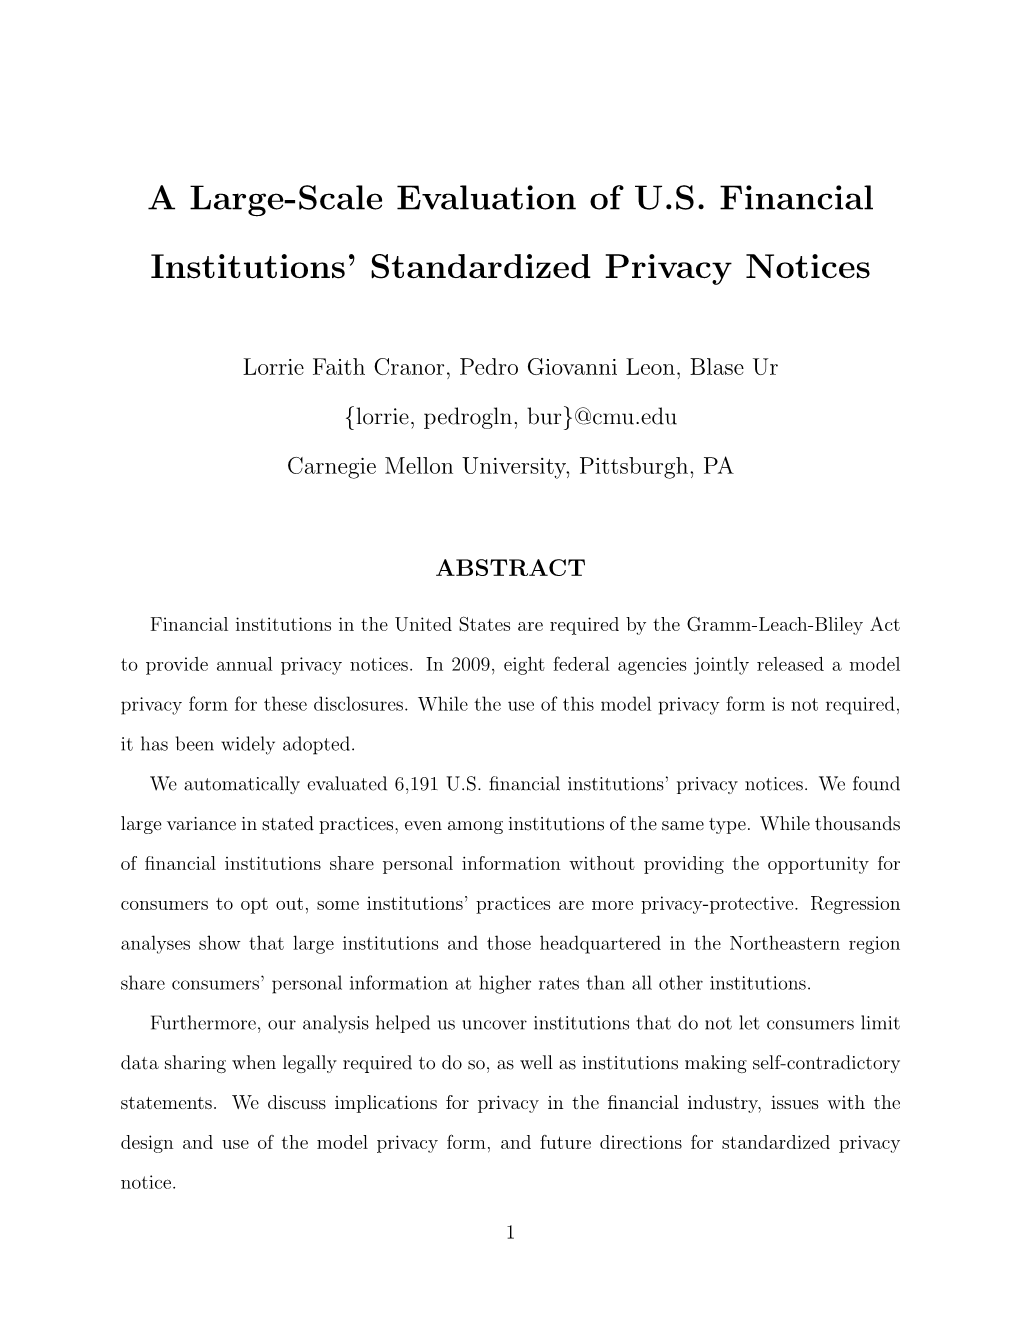 A Large-Scale Evaluation of U.S. Financial Institutions' Standardized